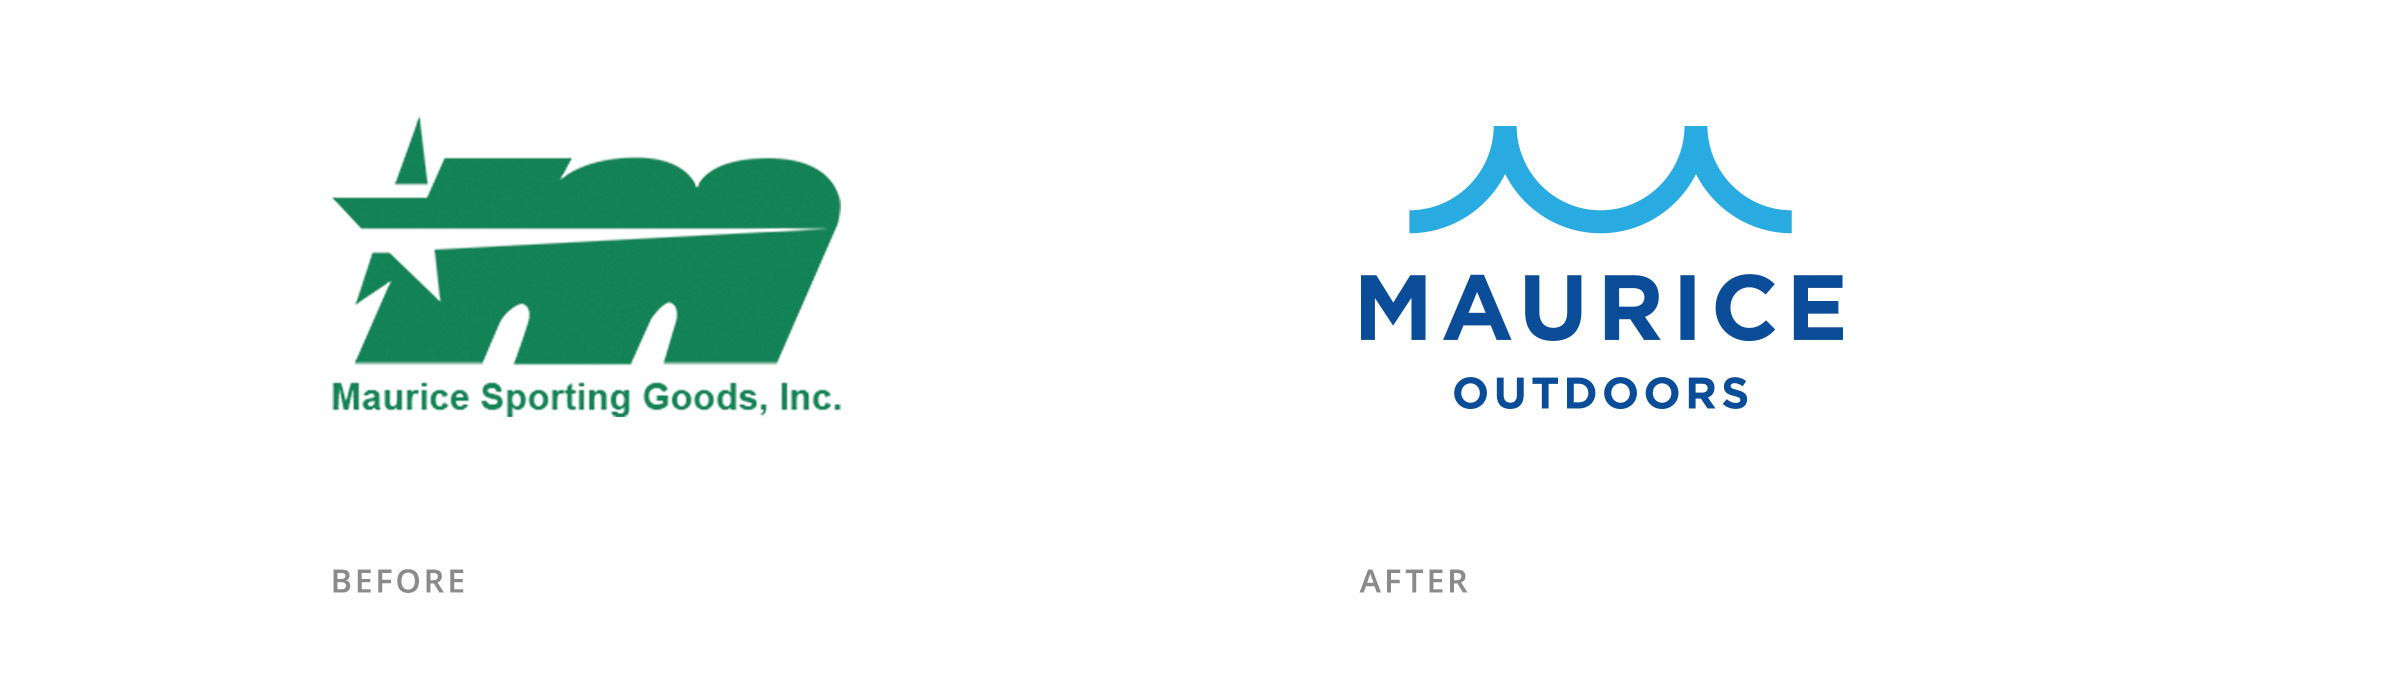 MAURICE OUTDOORS - Solid Branding